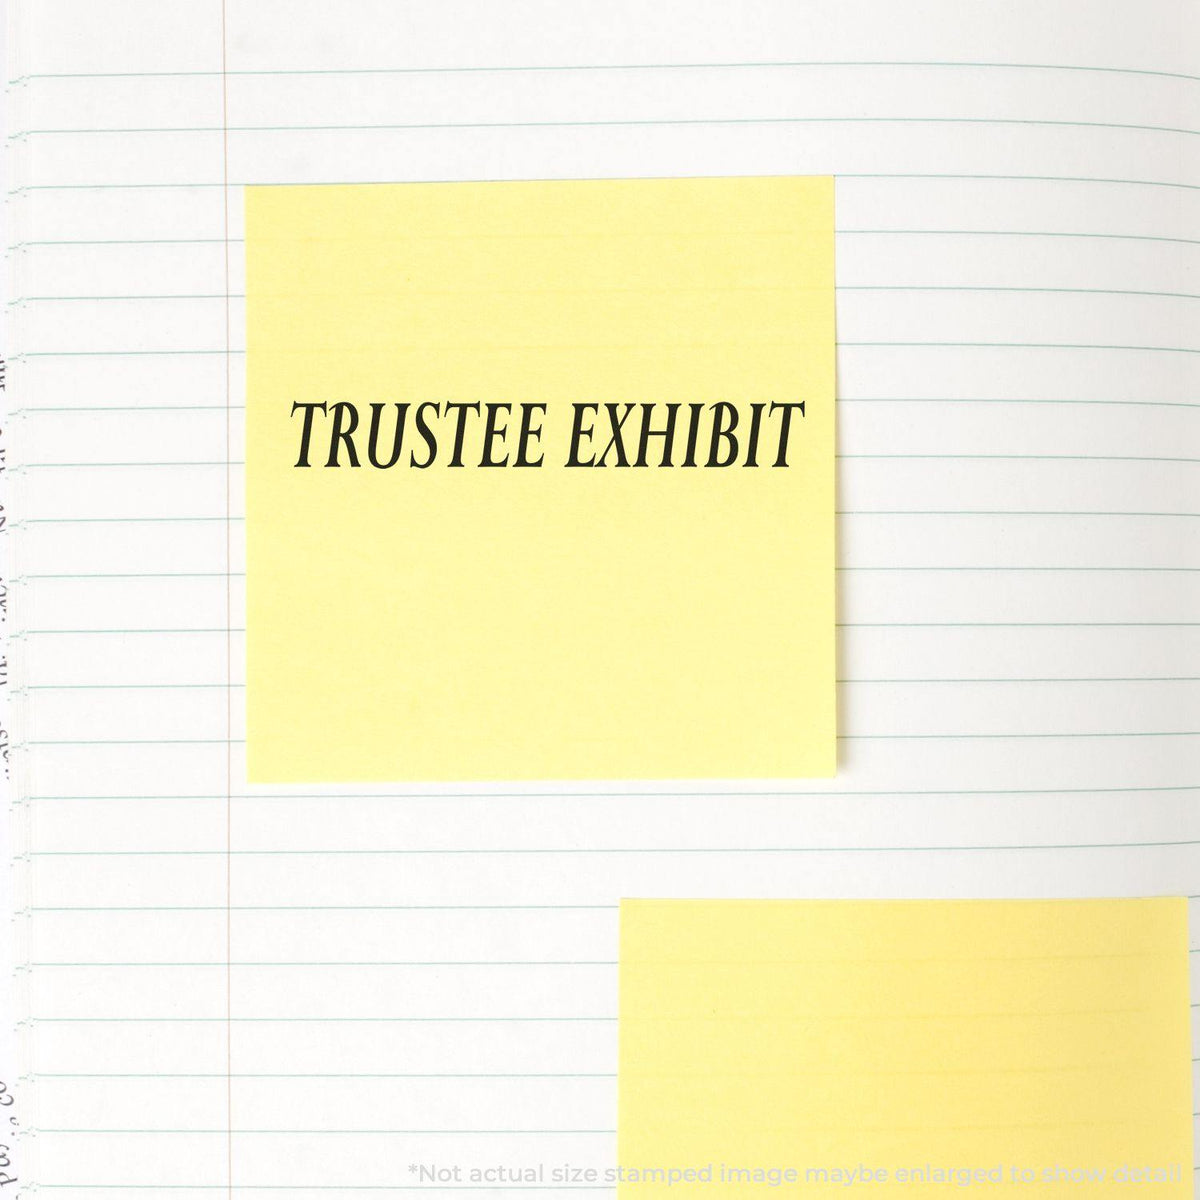 In Use Trustee Exhibit Rubber Stamp Image